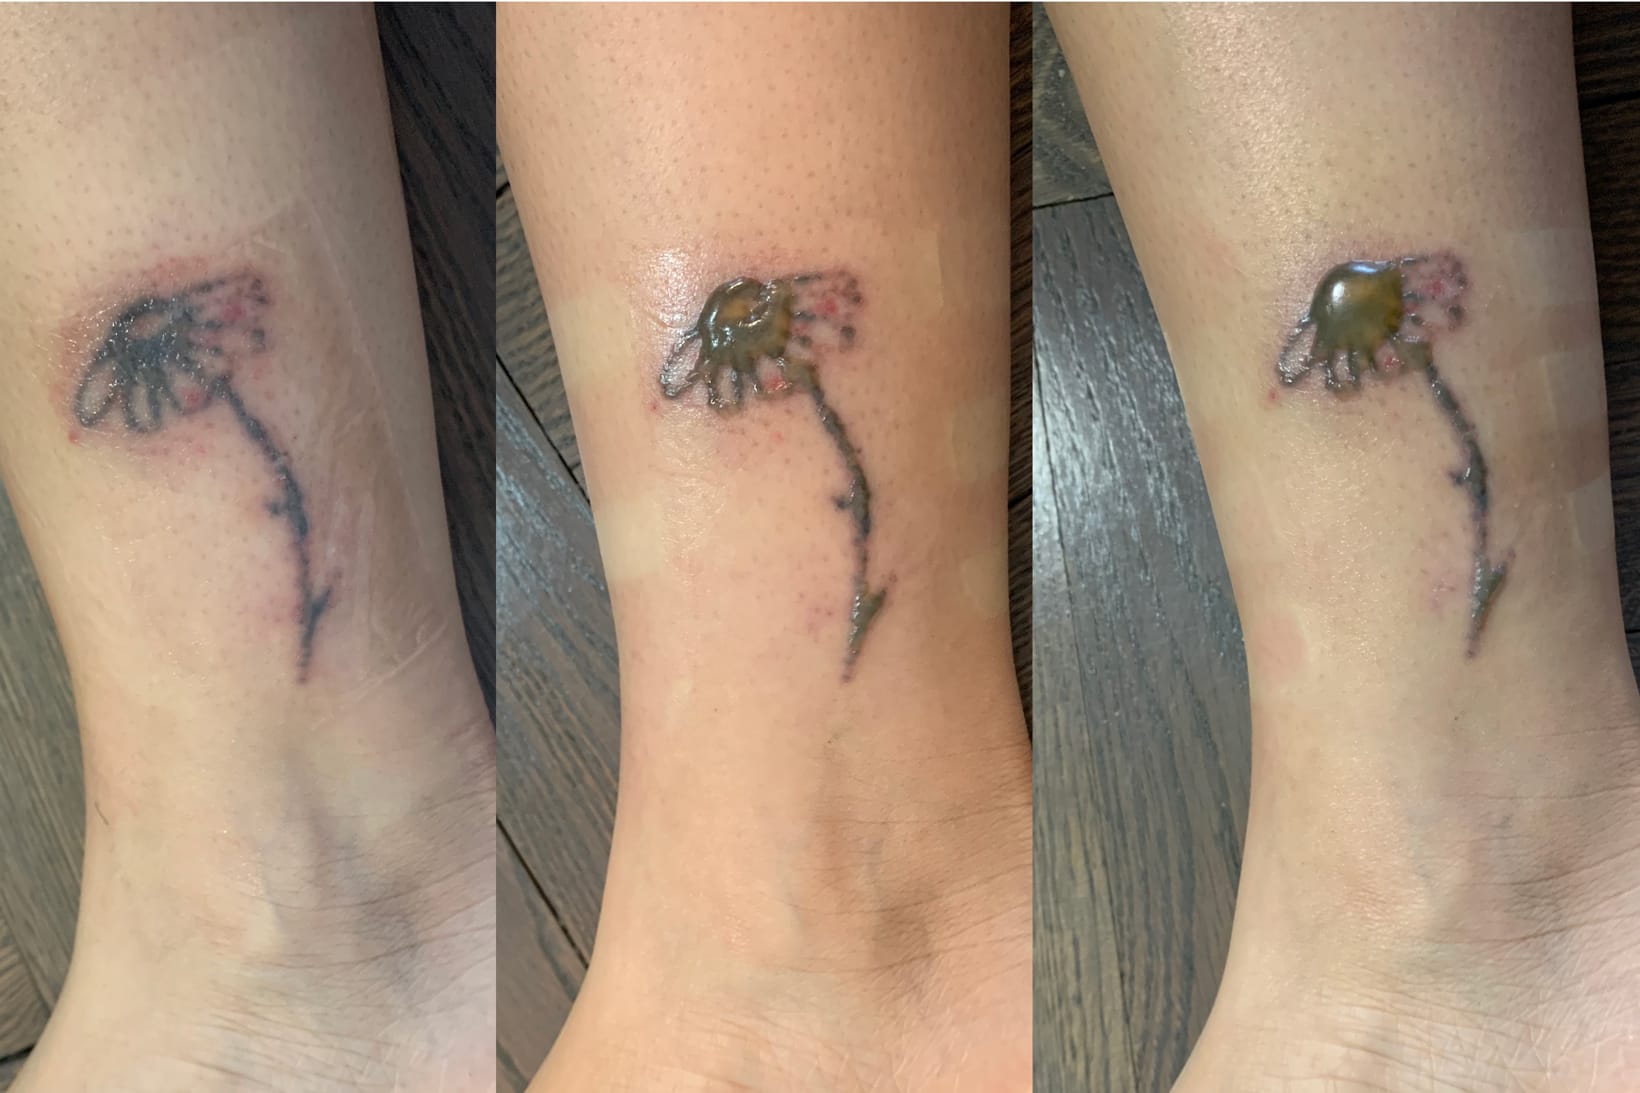 Share 97+ about laser tattoo removal before and after super cool -  .vn